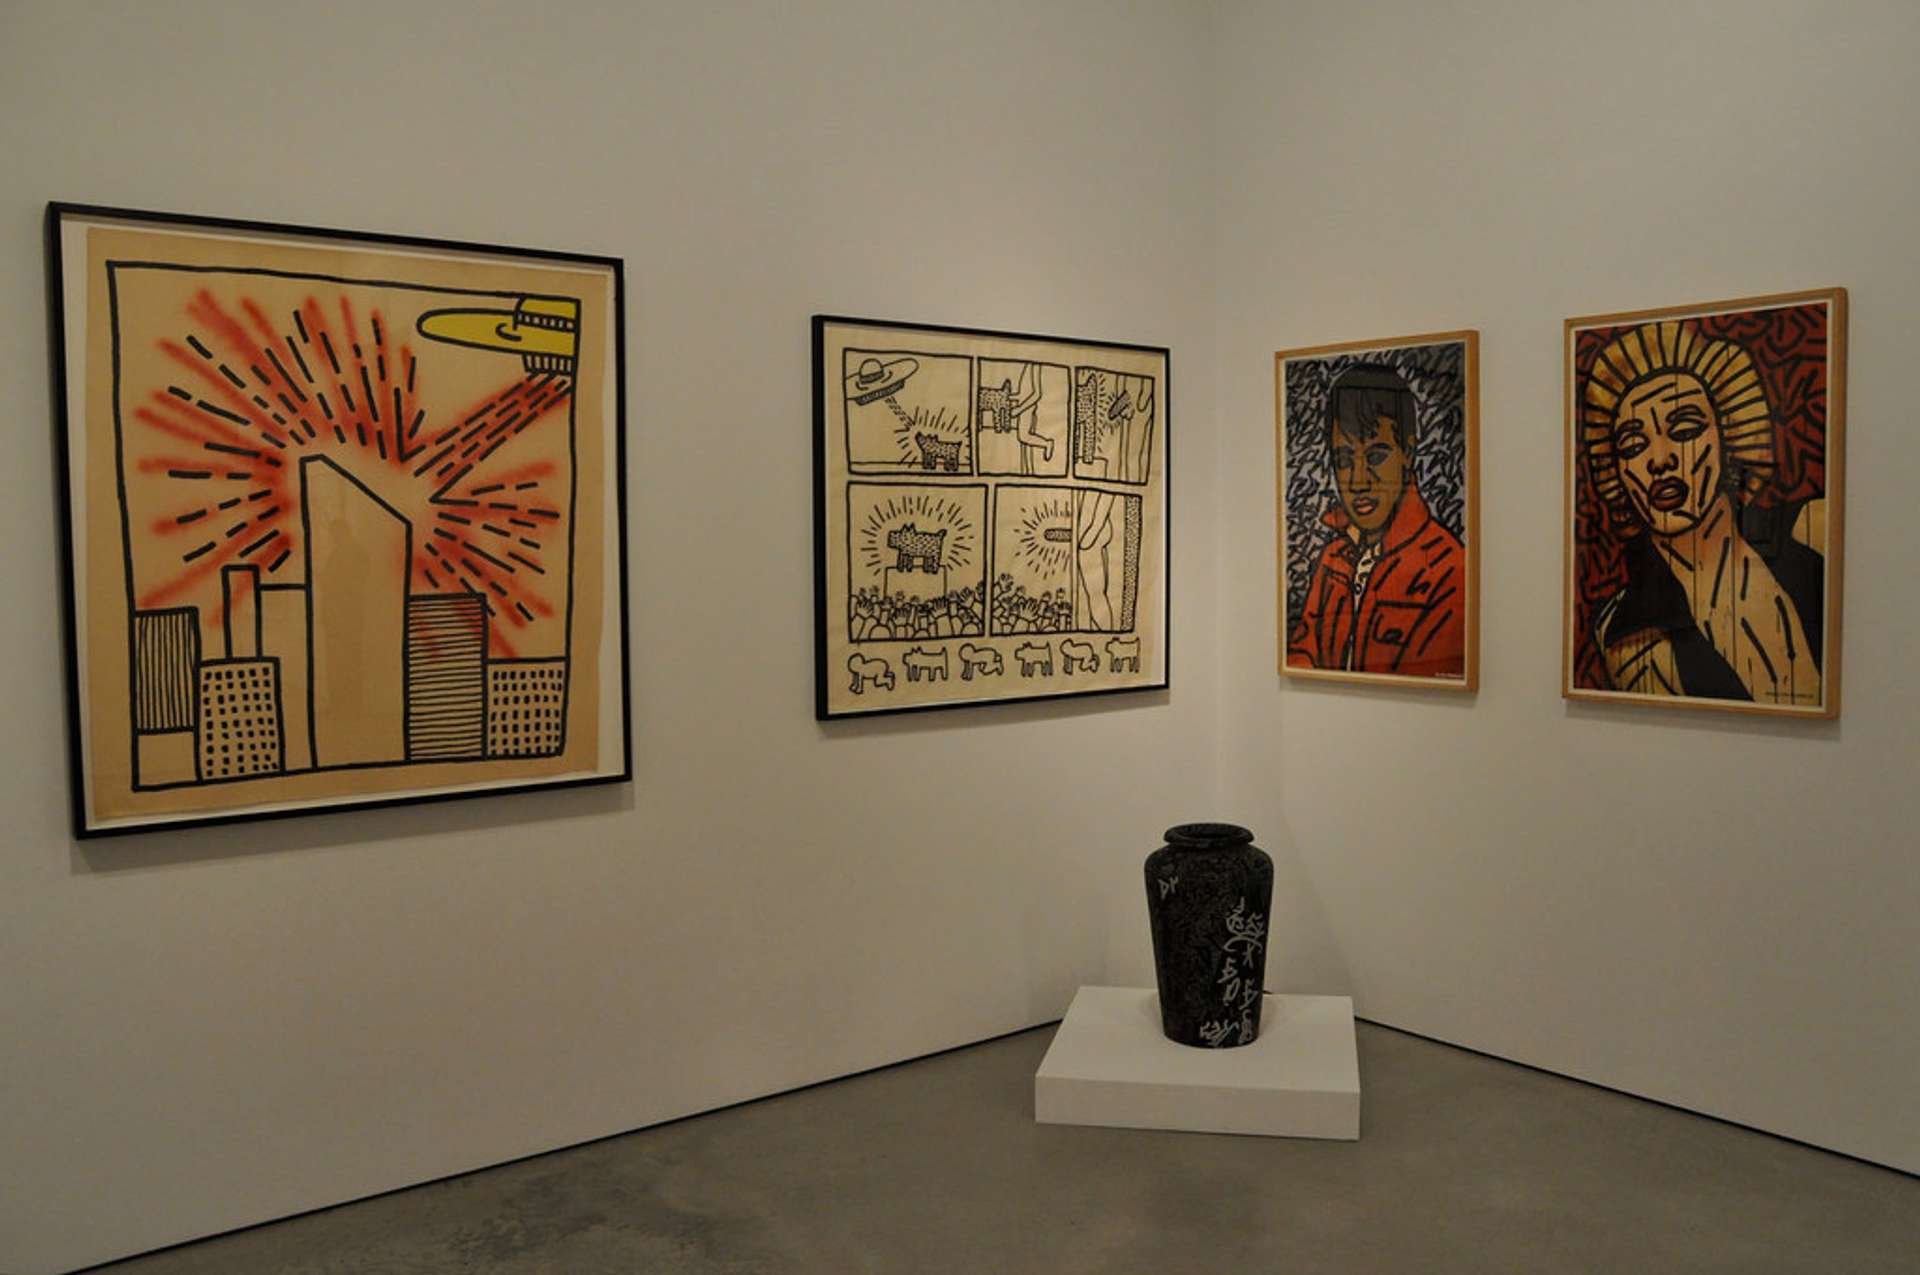 Left to right: Keith Haring, "Spaceship with Ray" (August 29, 1980); "Untitled" (January 16, 1981); "Untitled" (1981); "Untitled" (July 3, 1981). On floor: Keith Haring & LA II, "Untitled" (September 1983)